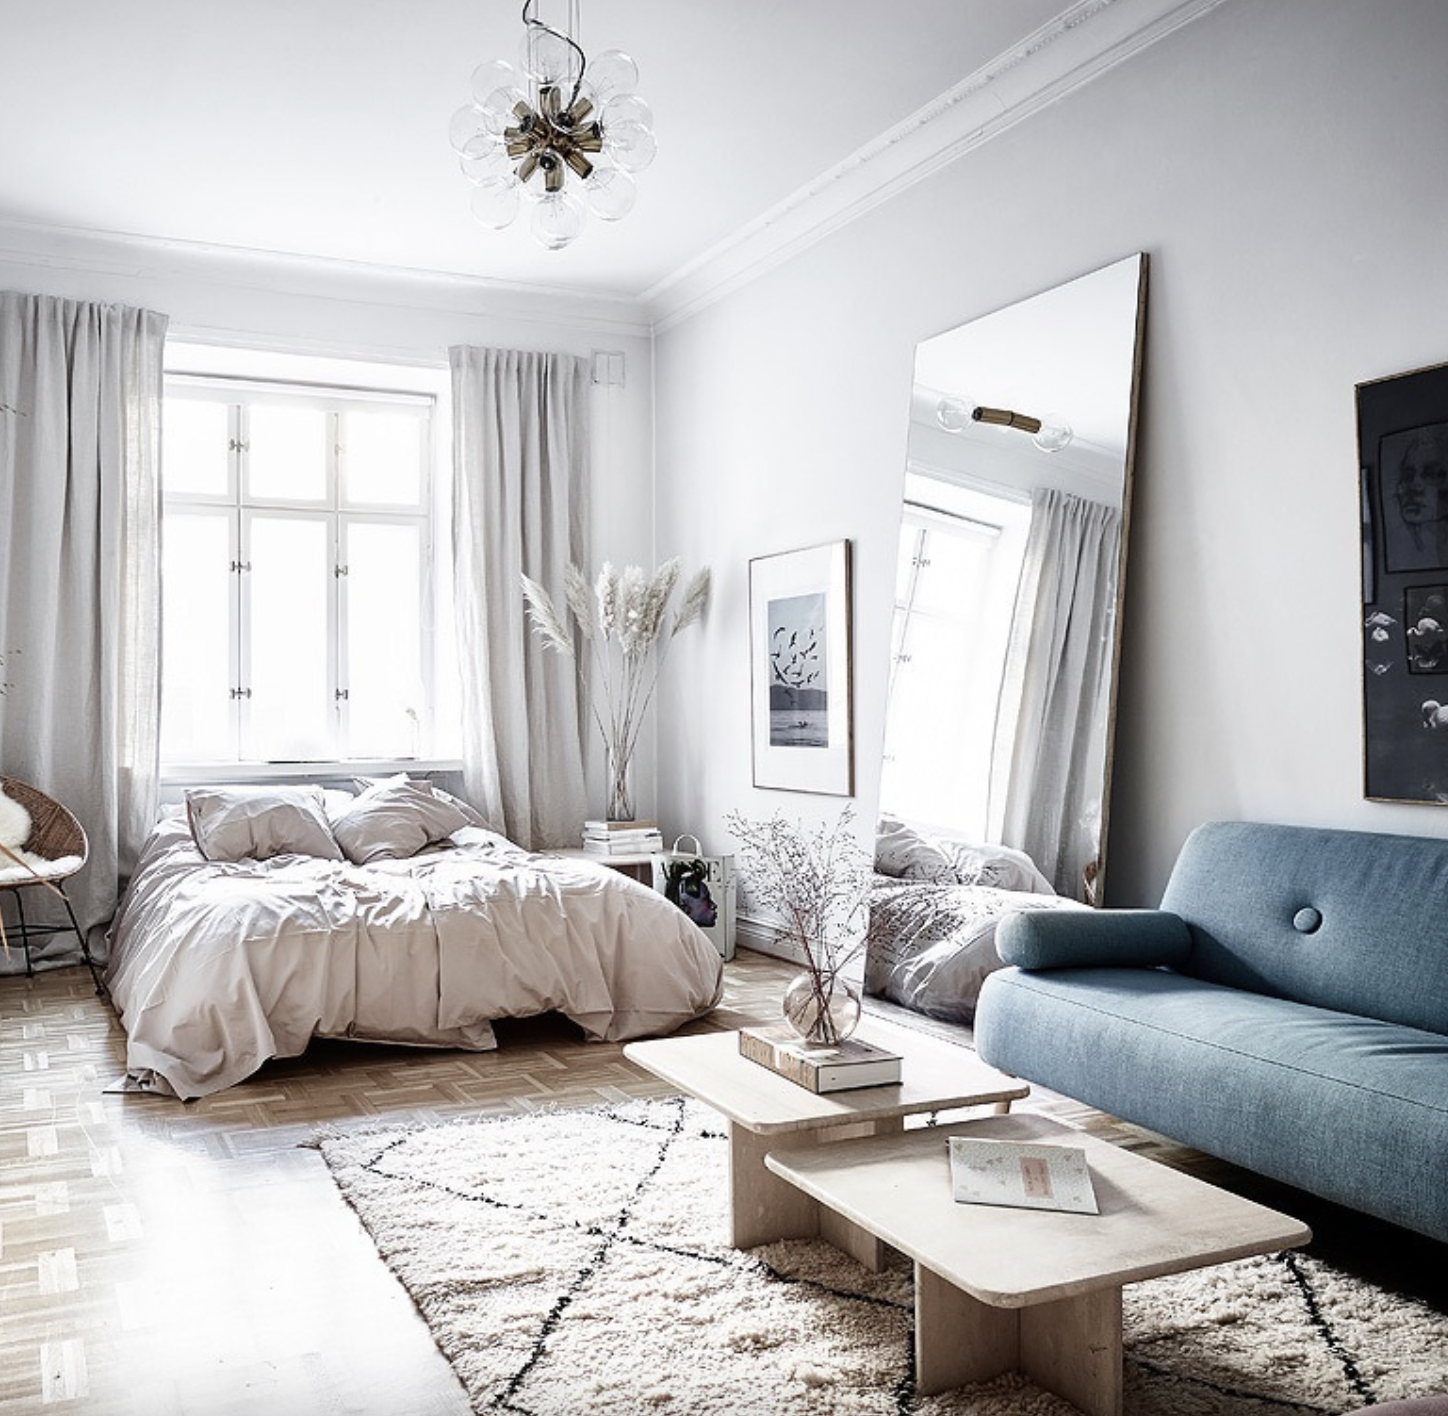 Airy And Chic Nordic Studio Apartment With Neutral Curtain